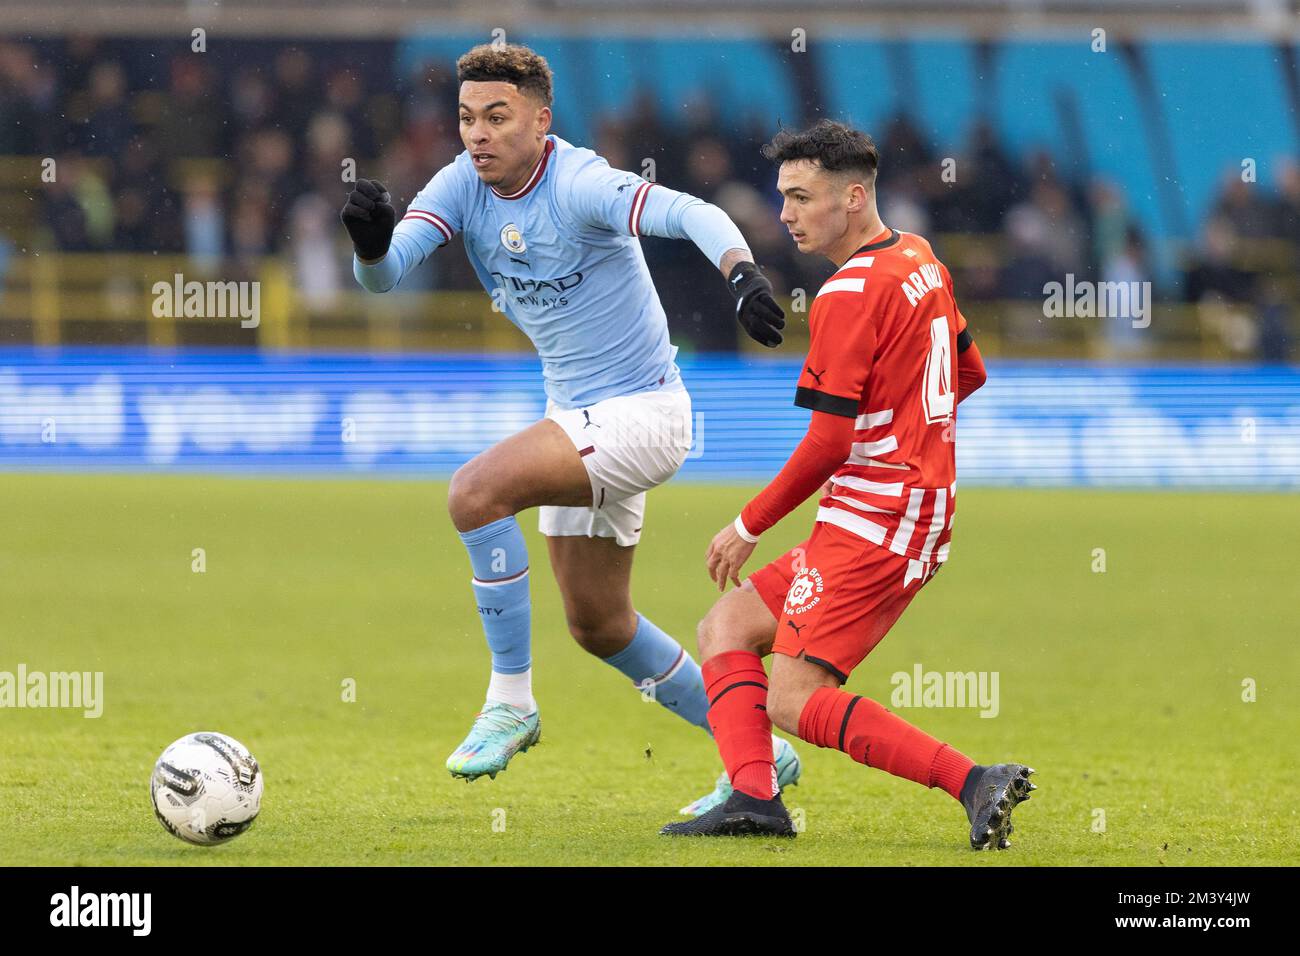 Morgan Rogers of Manchester City pressures Arnau Martinez #4 of Girona during the Mid season friendly match Manchester City vs Girona at Etihad Campus, Manchester, United Kingdom, 17th December 2022  (Photo by Phil Bryan/News Images) Stock Photo